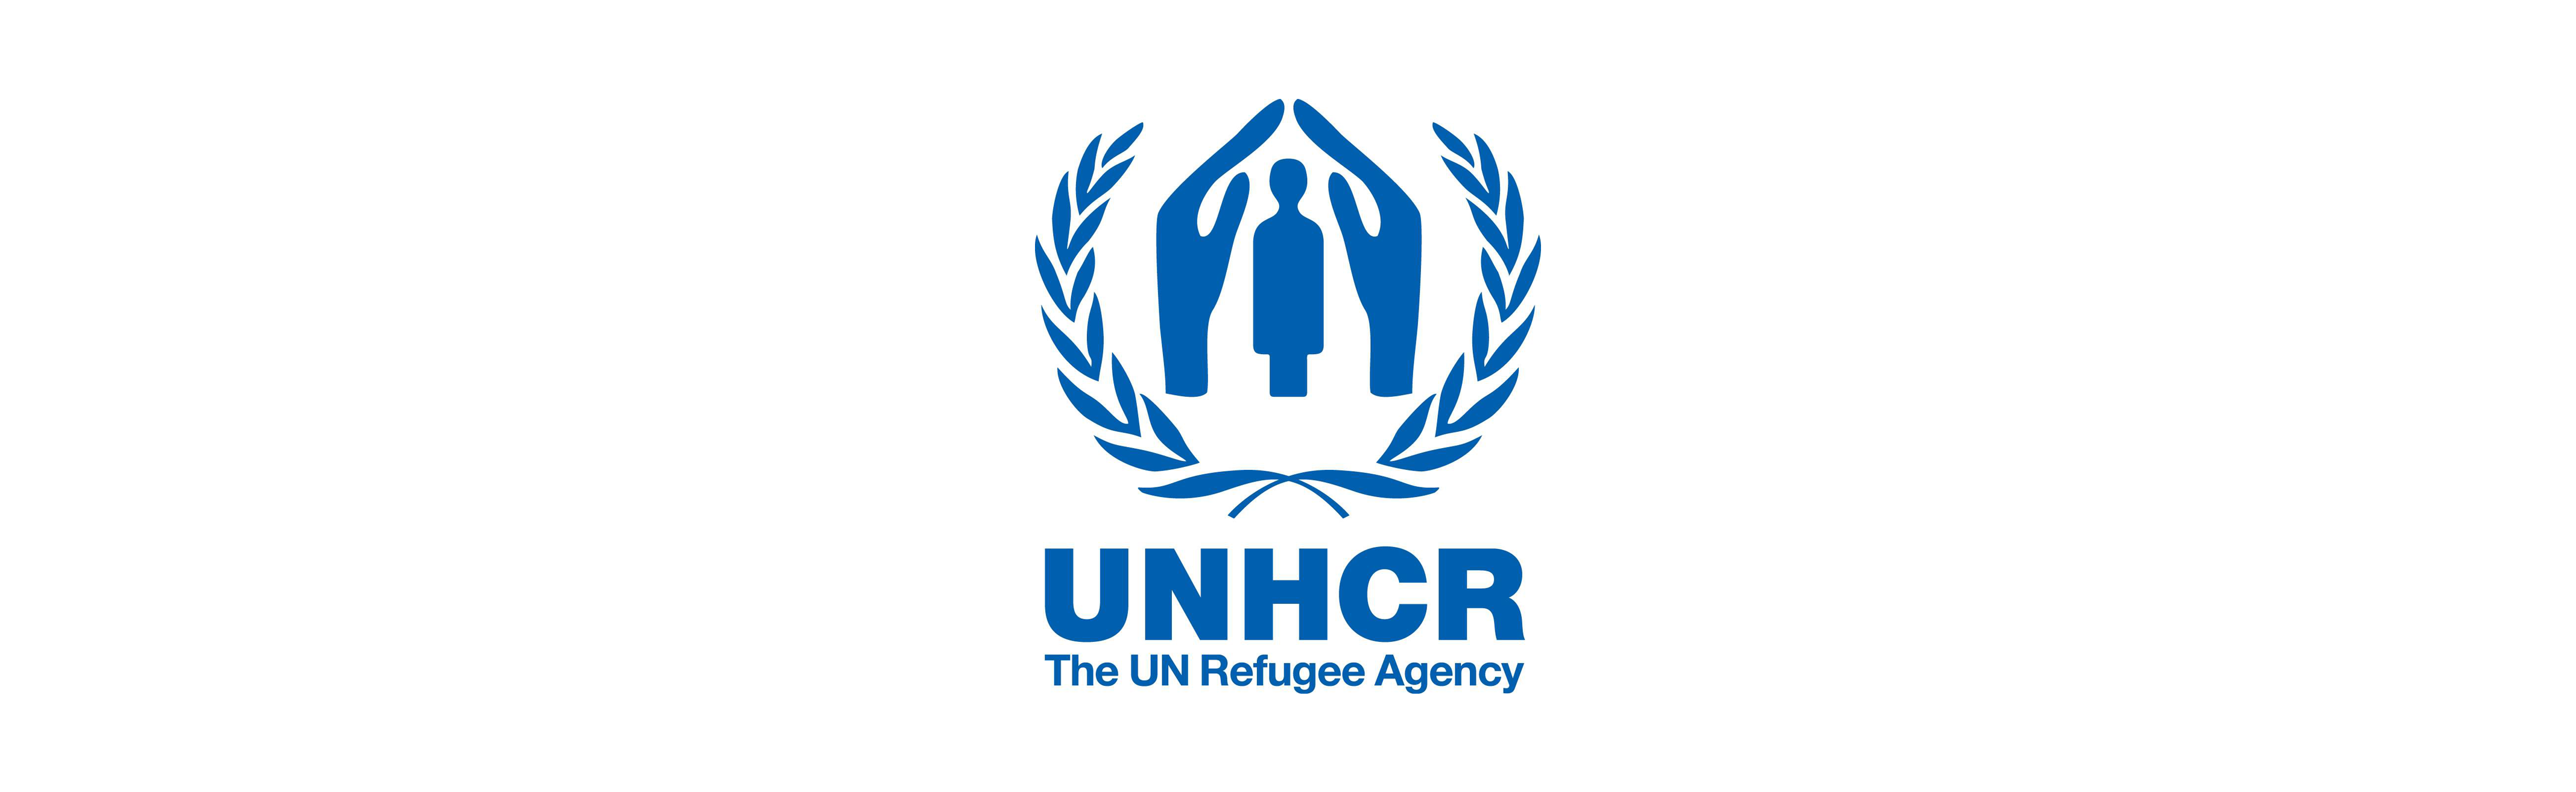 708 Unhcr Stock Video Footage - 4K and HD Video Clips | Shutterstock